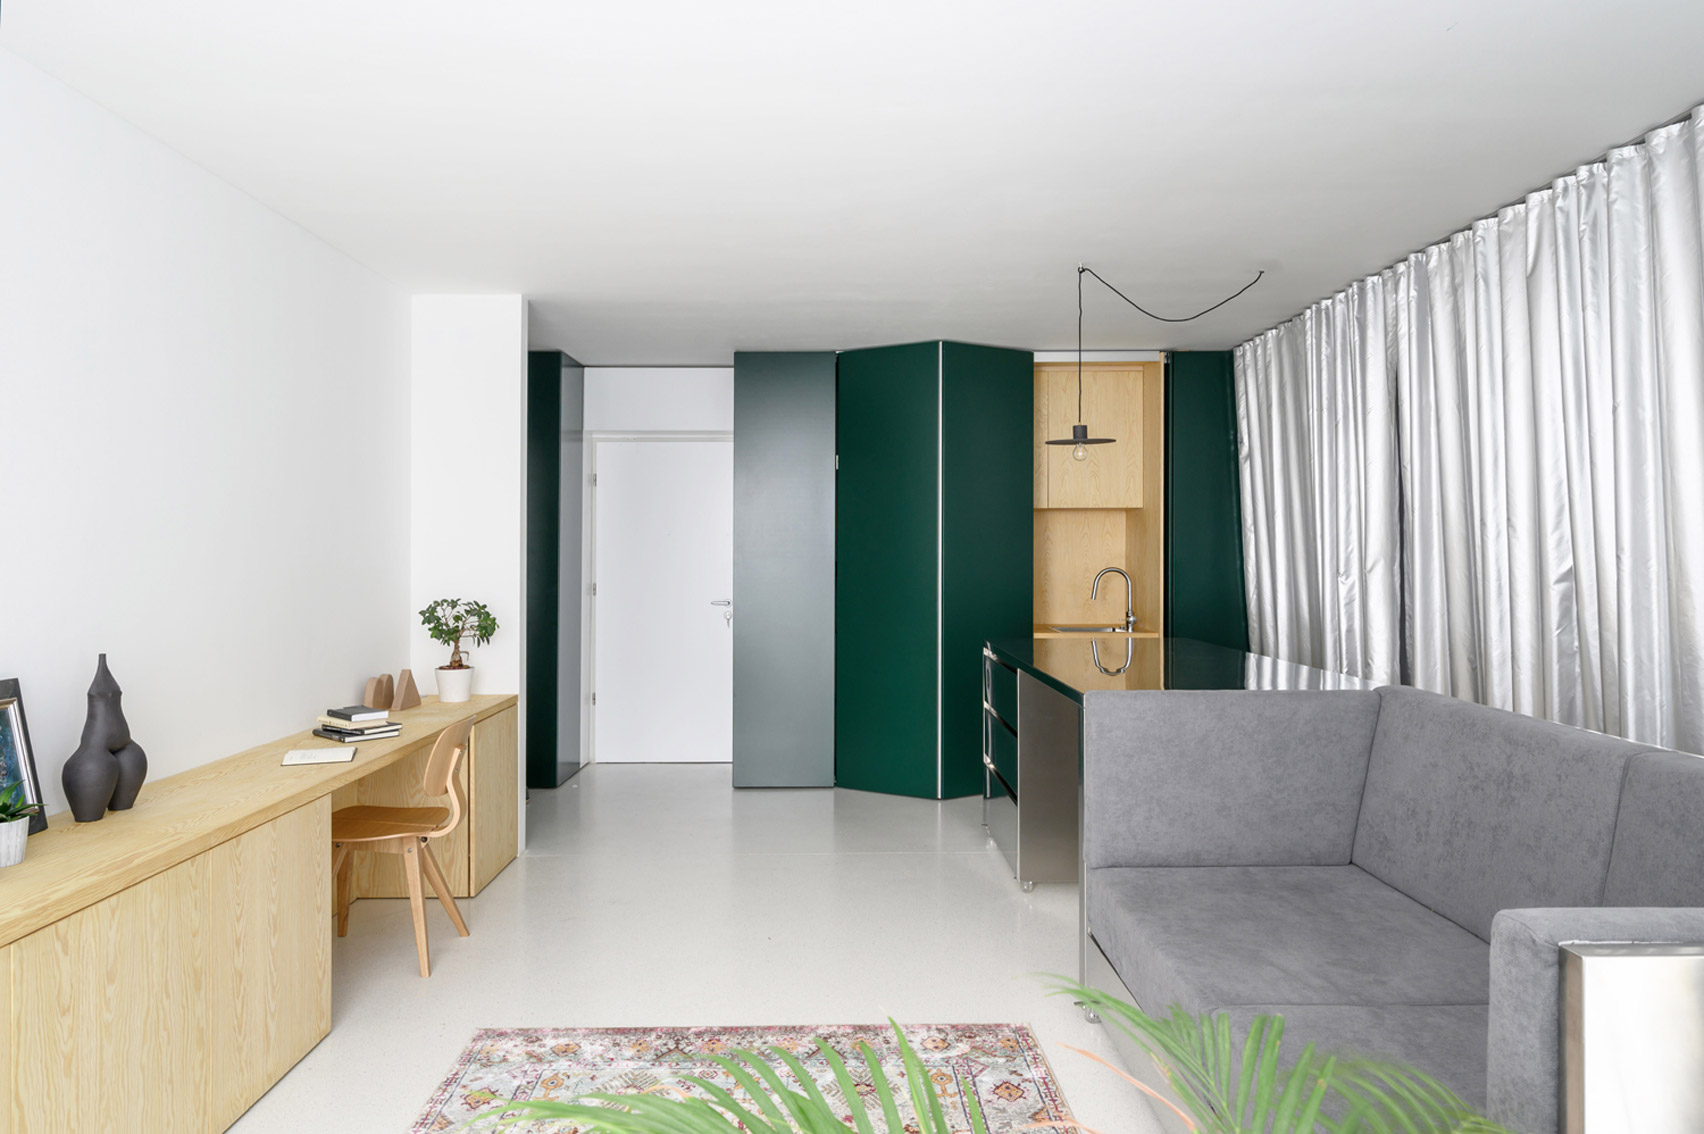 Ljubljana apartment features mobile furnishings and silver curtains